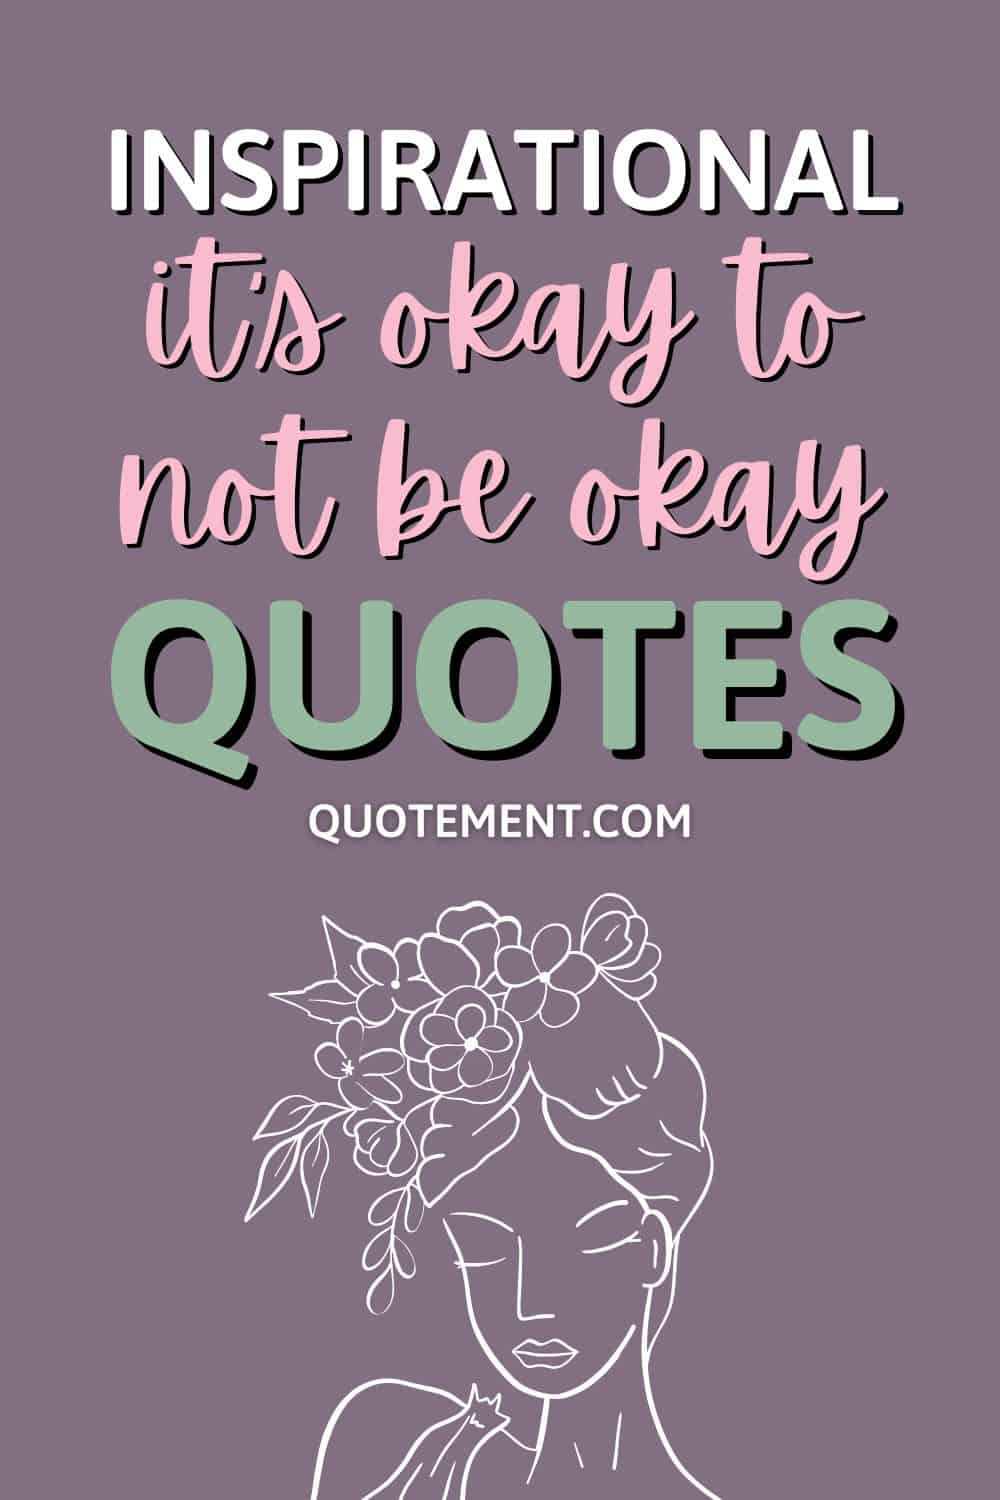 50 Genius It’s Okay To Not Be Okay Quotes To Inspire You